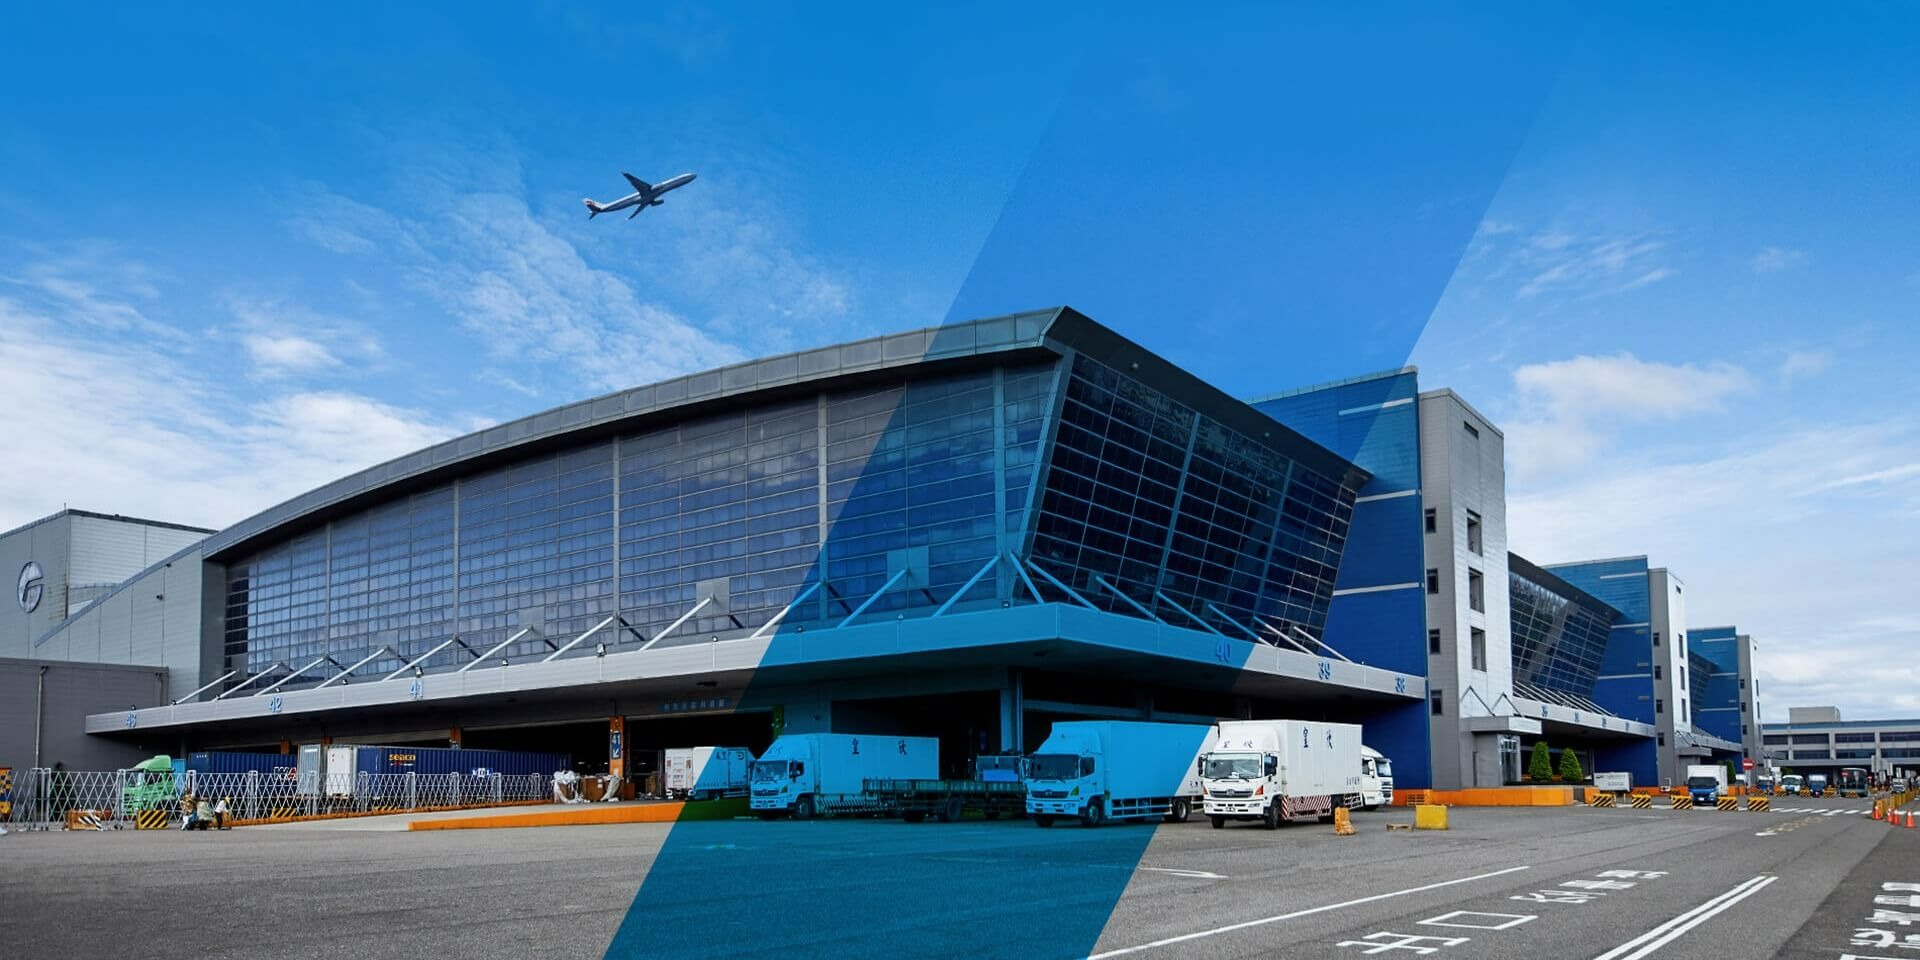 The global air cargo operation center integrating innovation and tax-free cargo logistics services, connecting your business to the international world